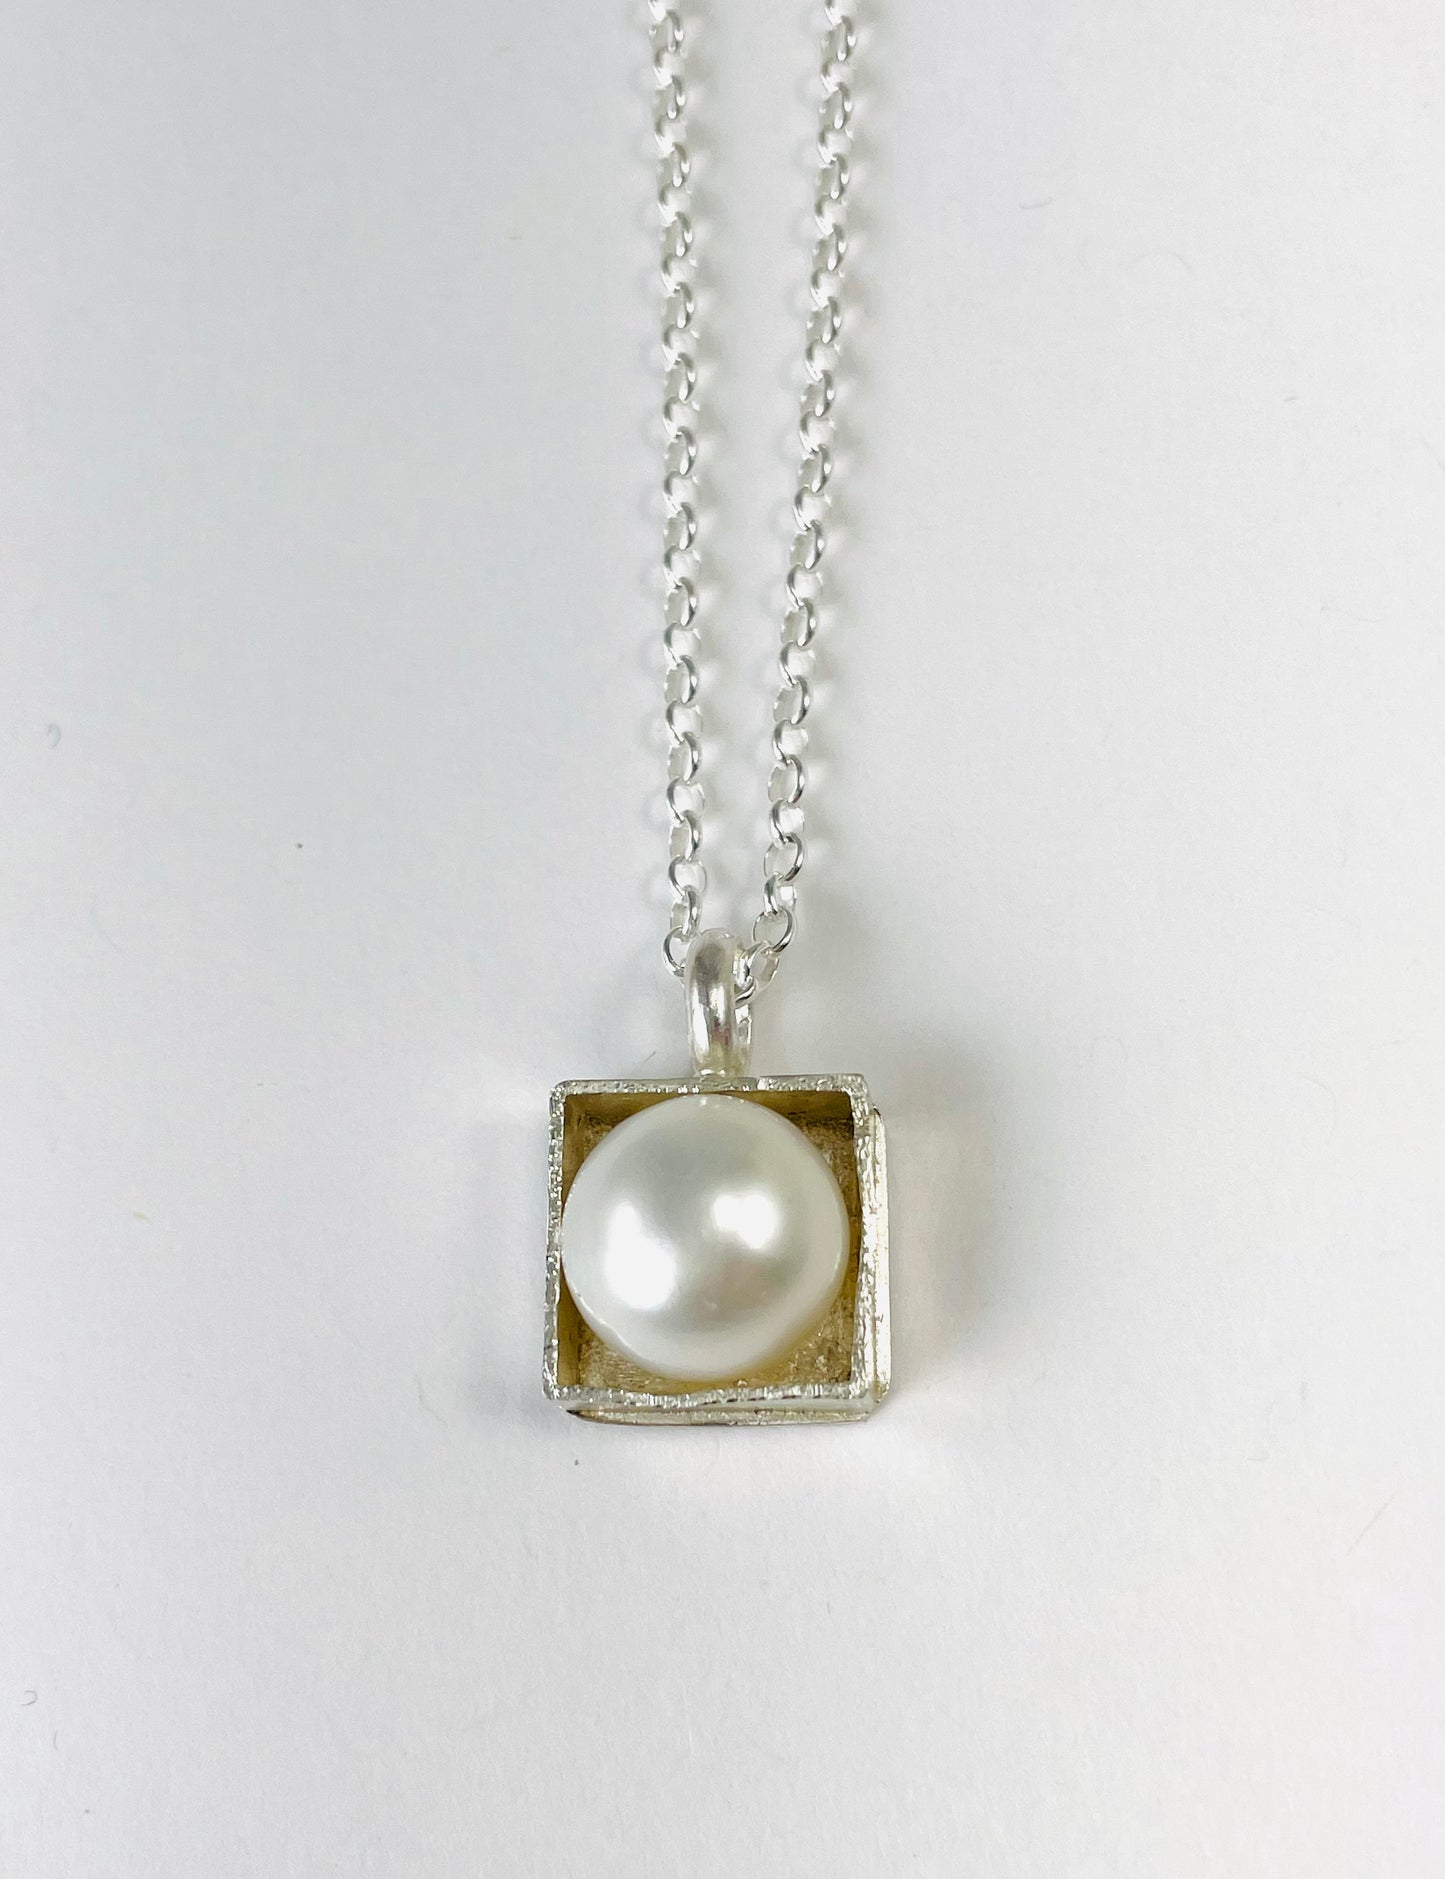 Sterling silver 'pearl in a box' pendant on an 18-inch curb chain.